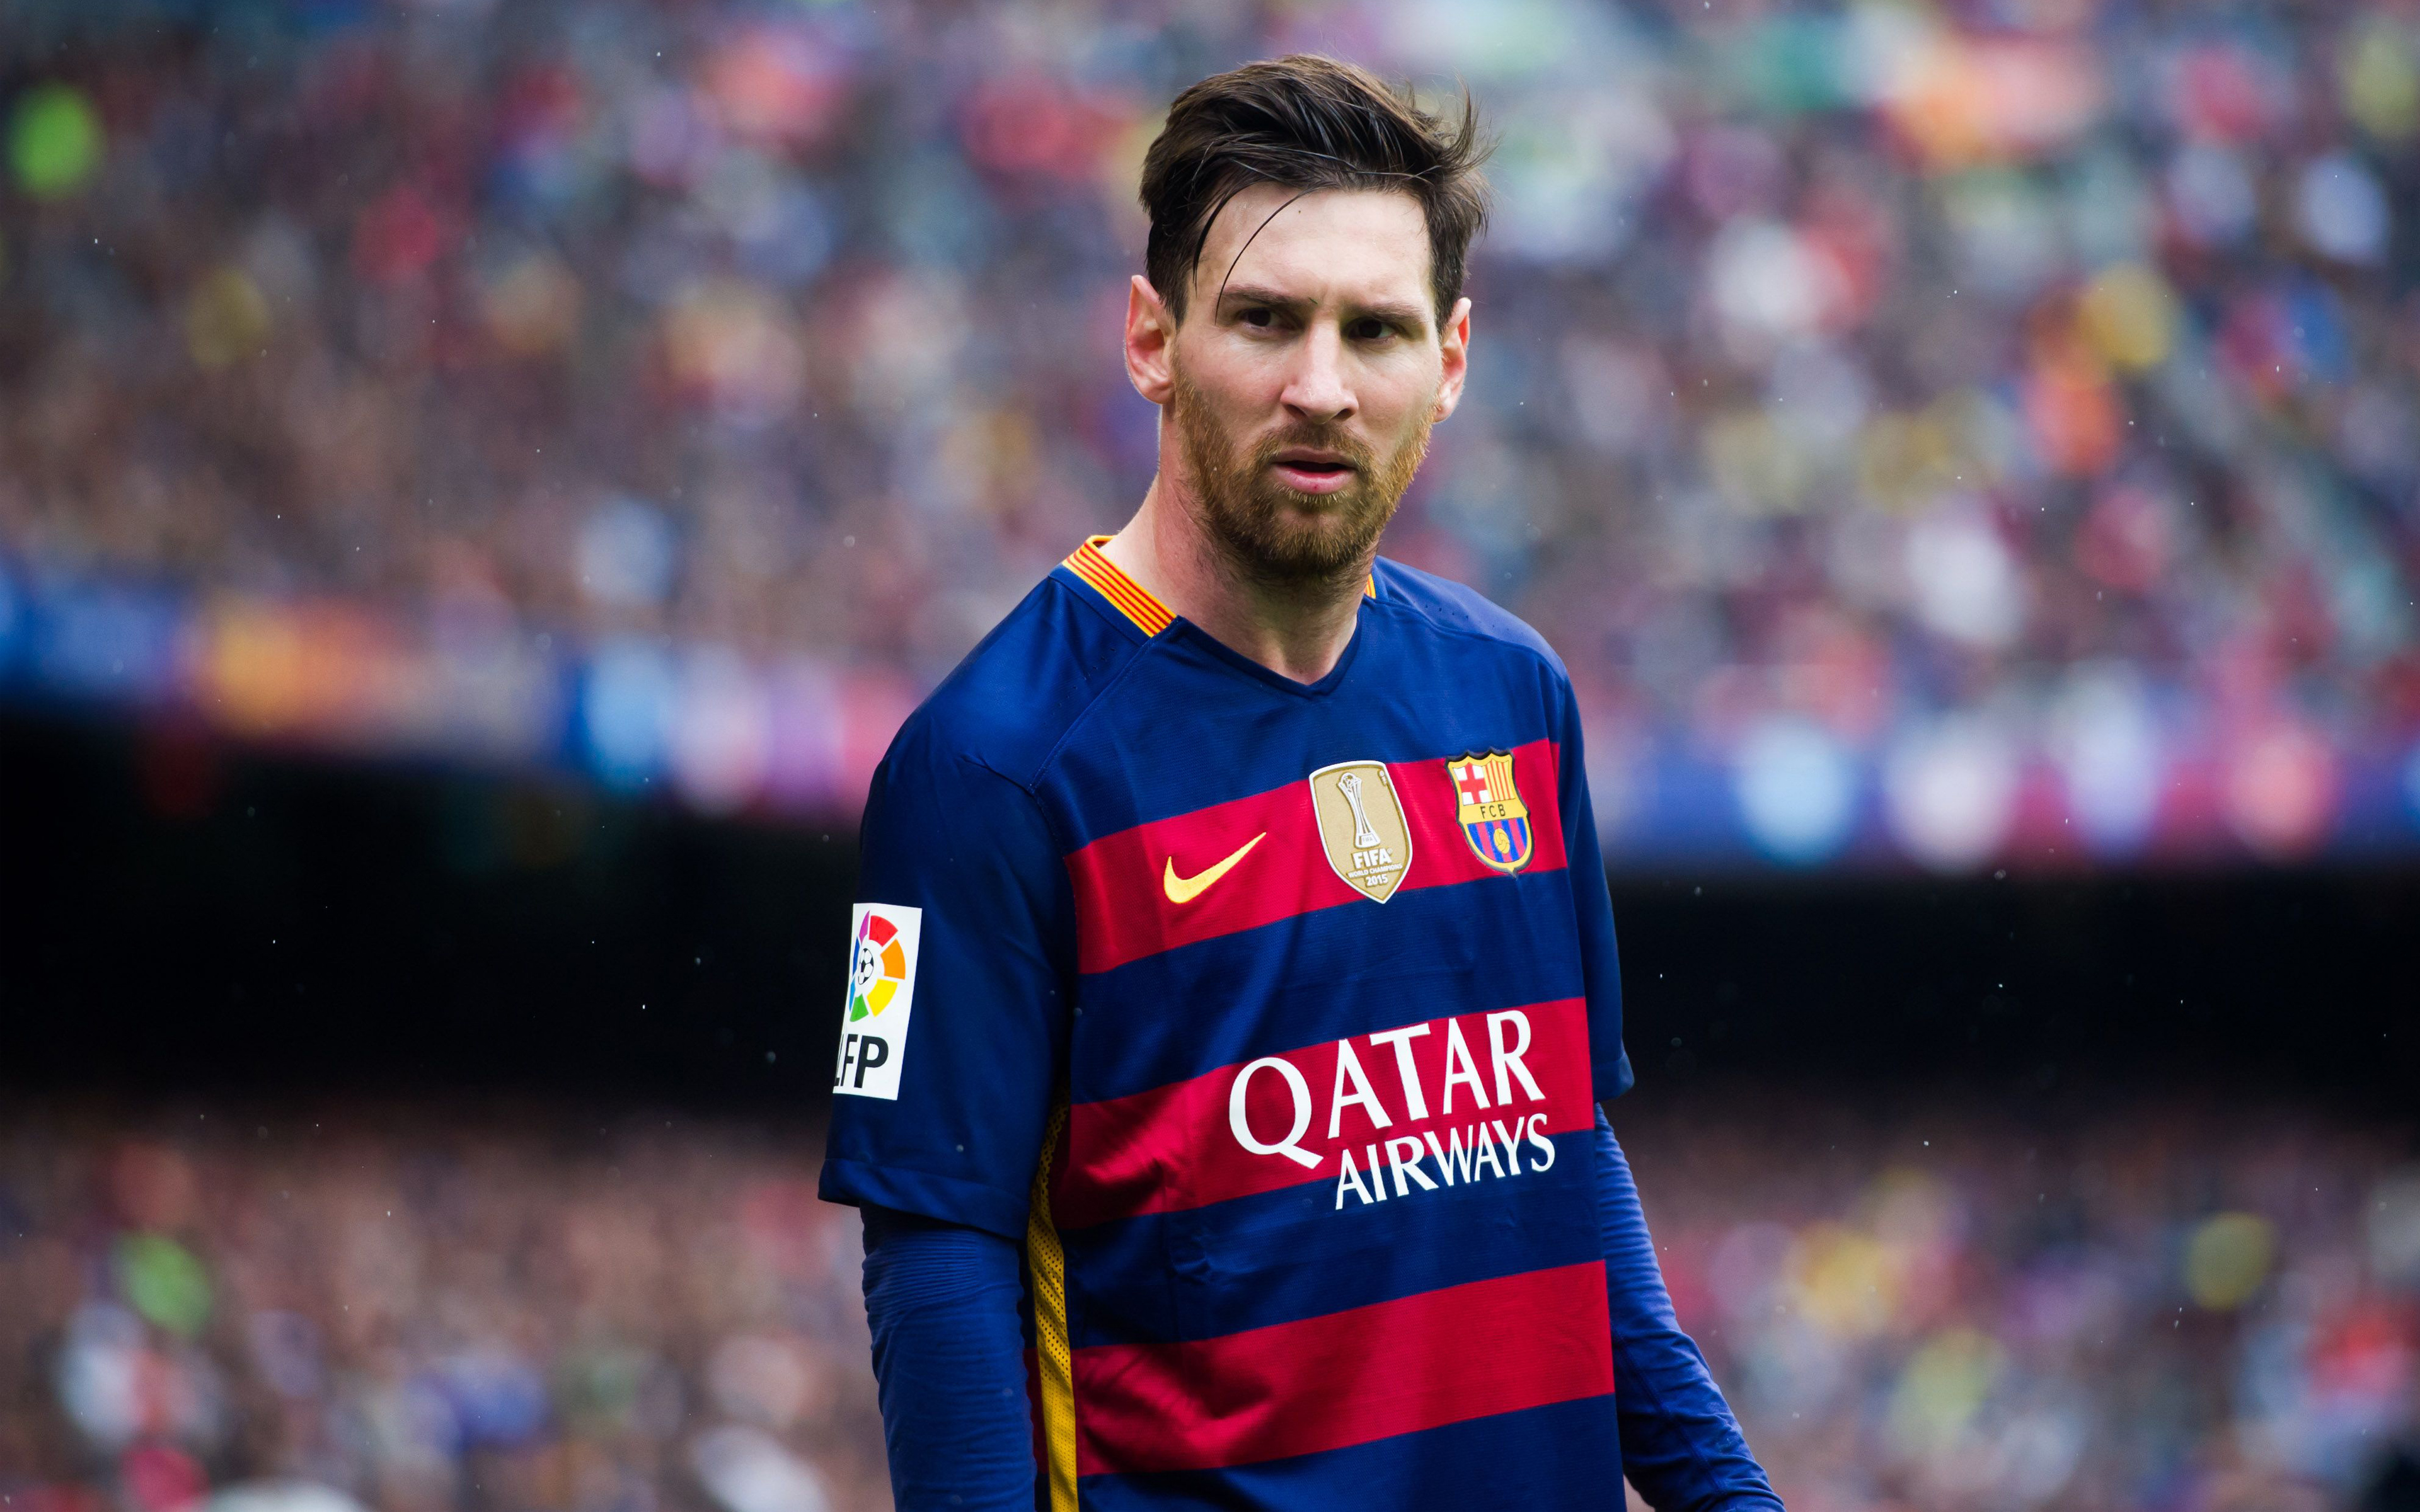 messi wallpaper hd,product,football player,player,soccer player,fan